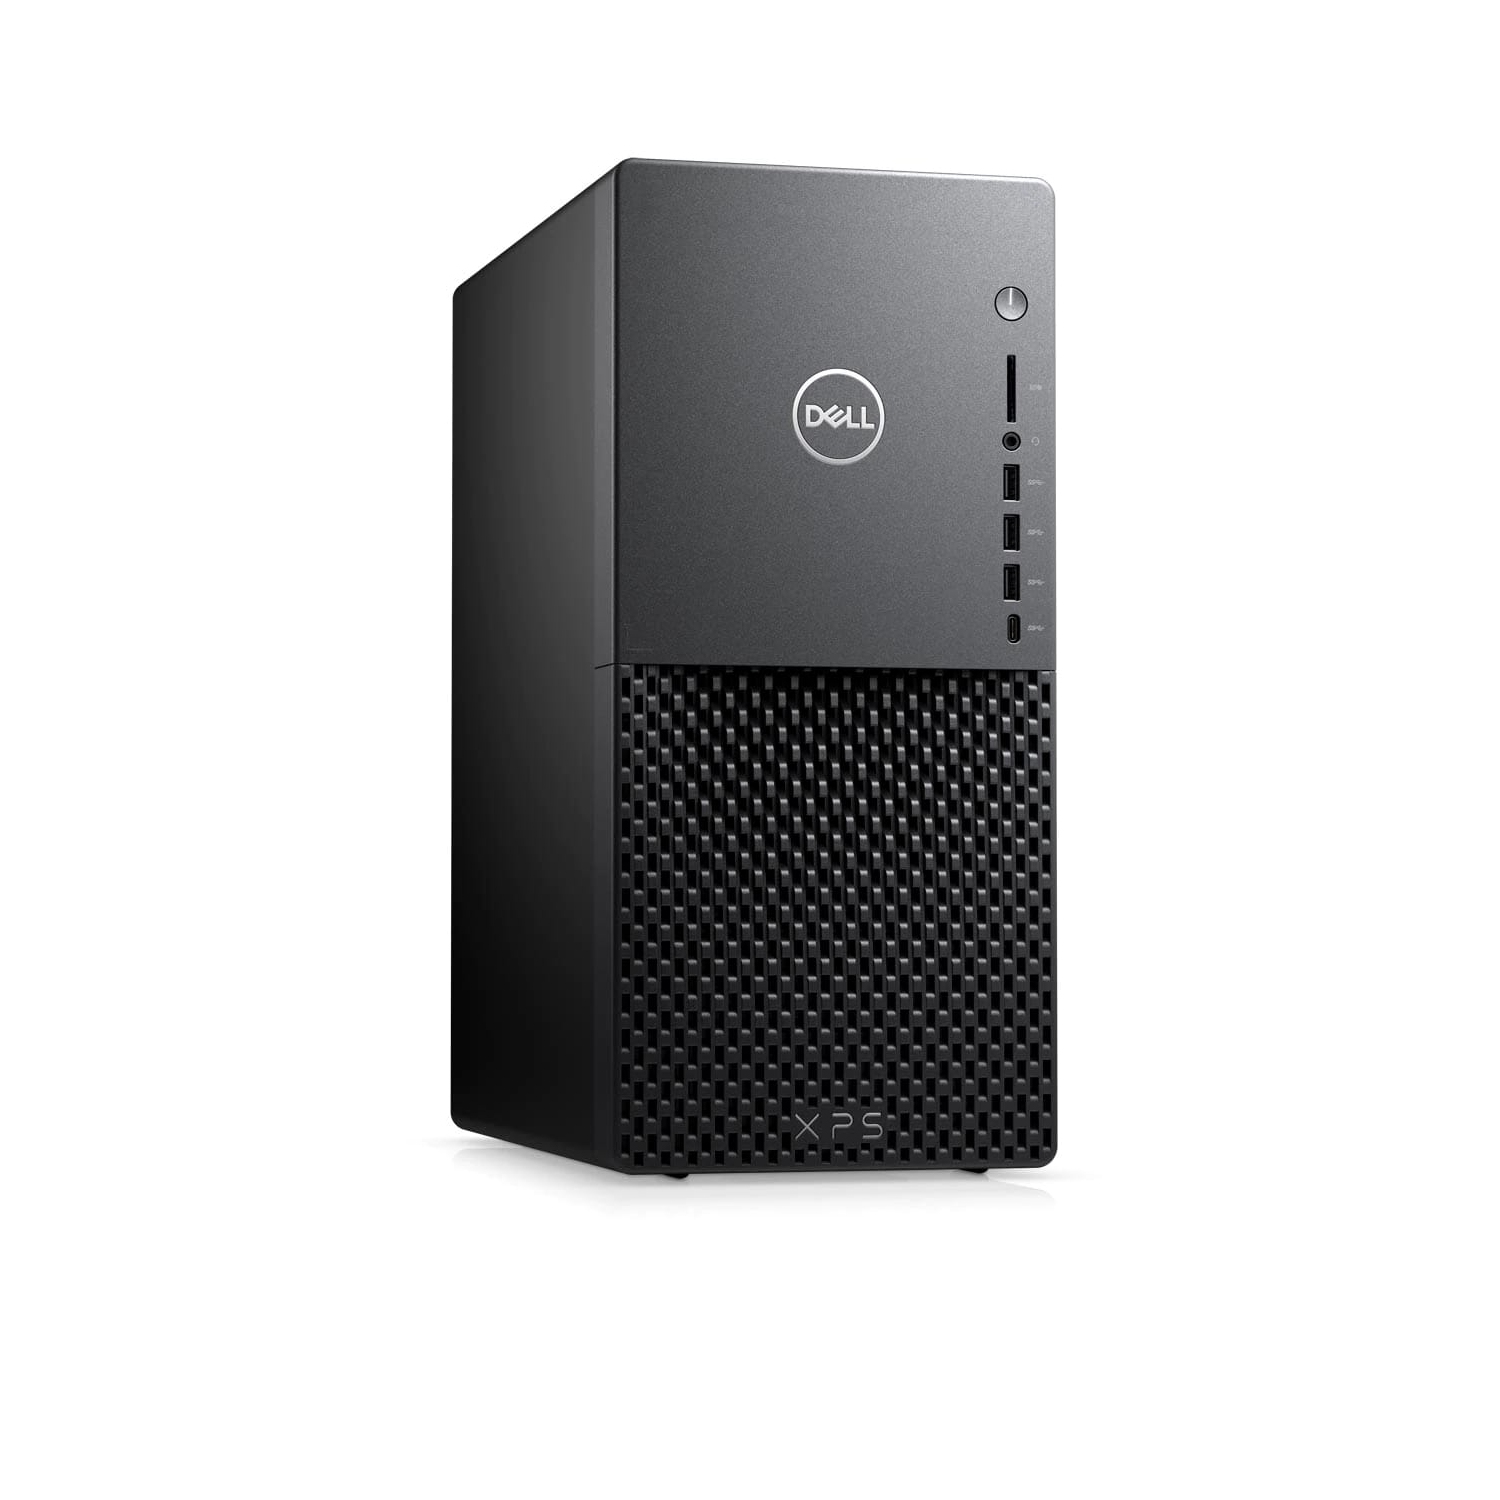 Refurbished (Excellent) - Dell XPS 8940 Desktop (2020) | Core i5 - 512GB SSD - 16GB RAM - RX 5700 | 6 Cores @ 4.4 GHz - 11th Gen CPU Certified Refurbished